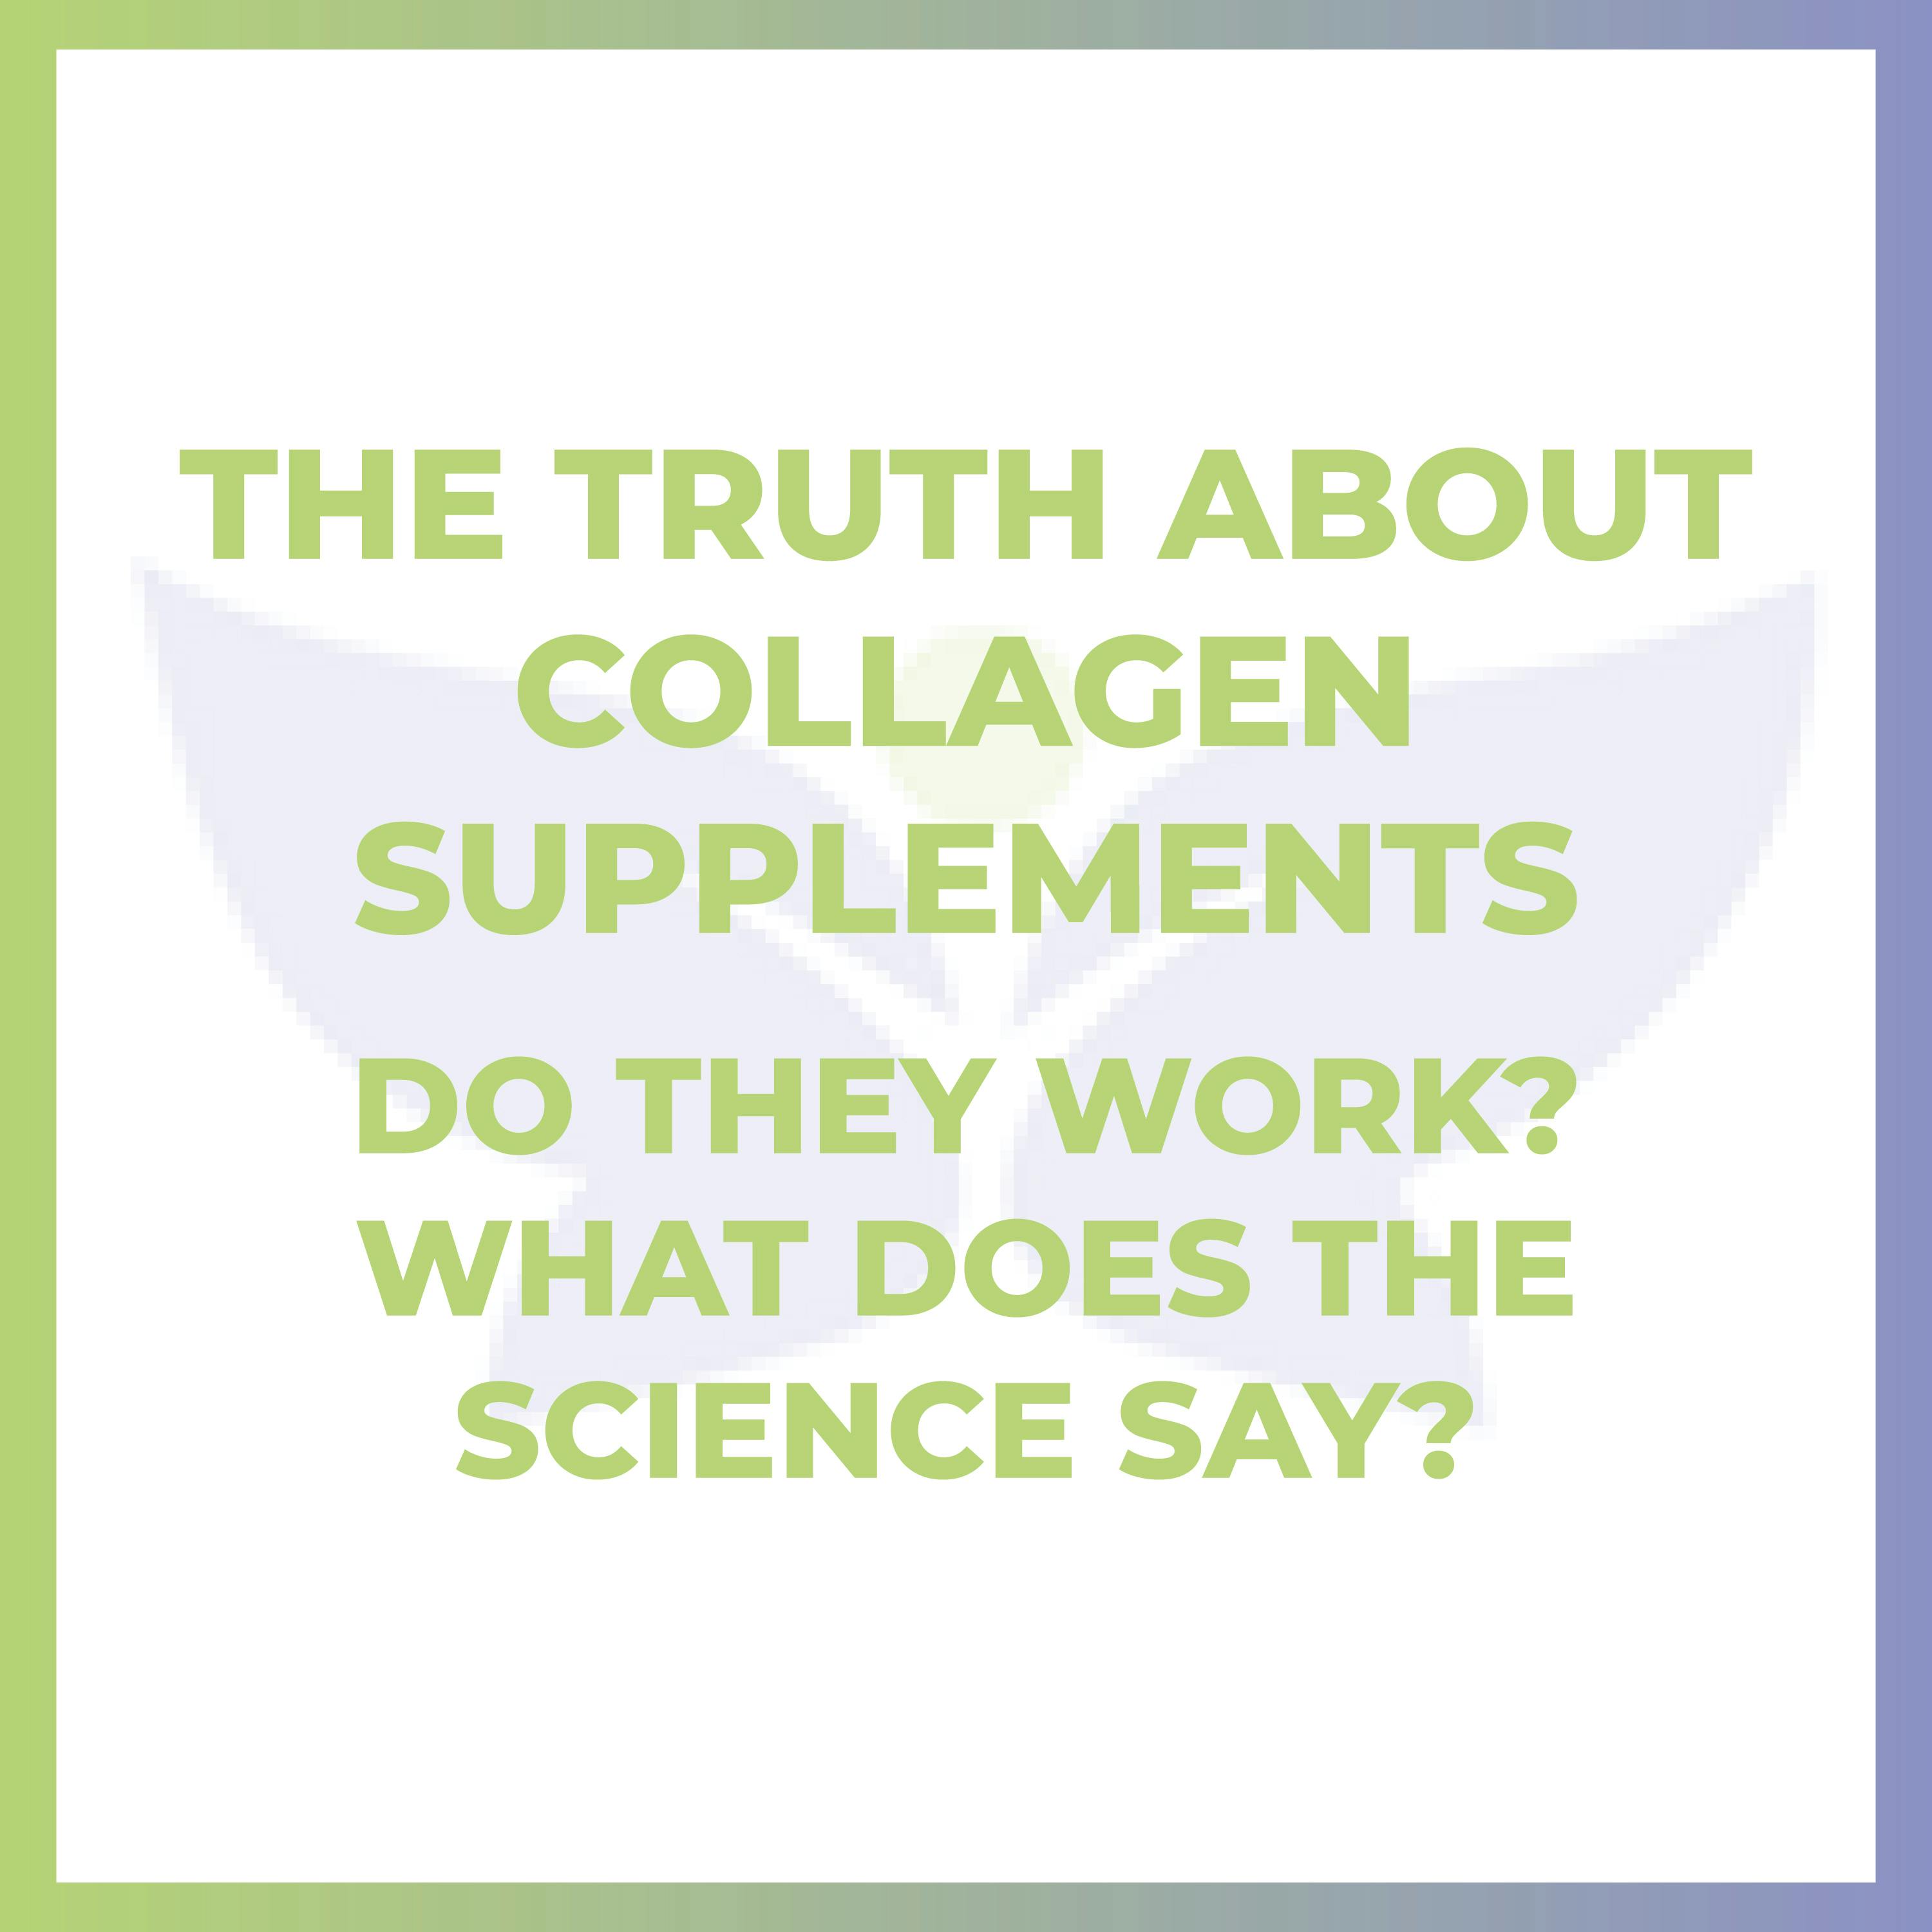 The Truth About Collagen Supplements – Do They Work? What Does the Science Say?